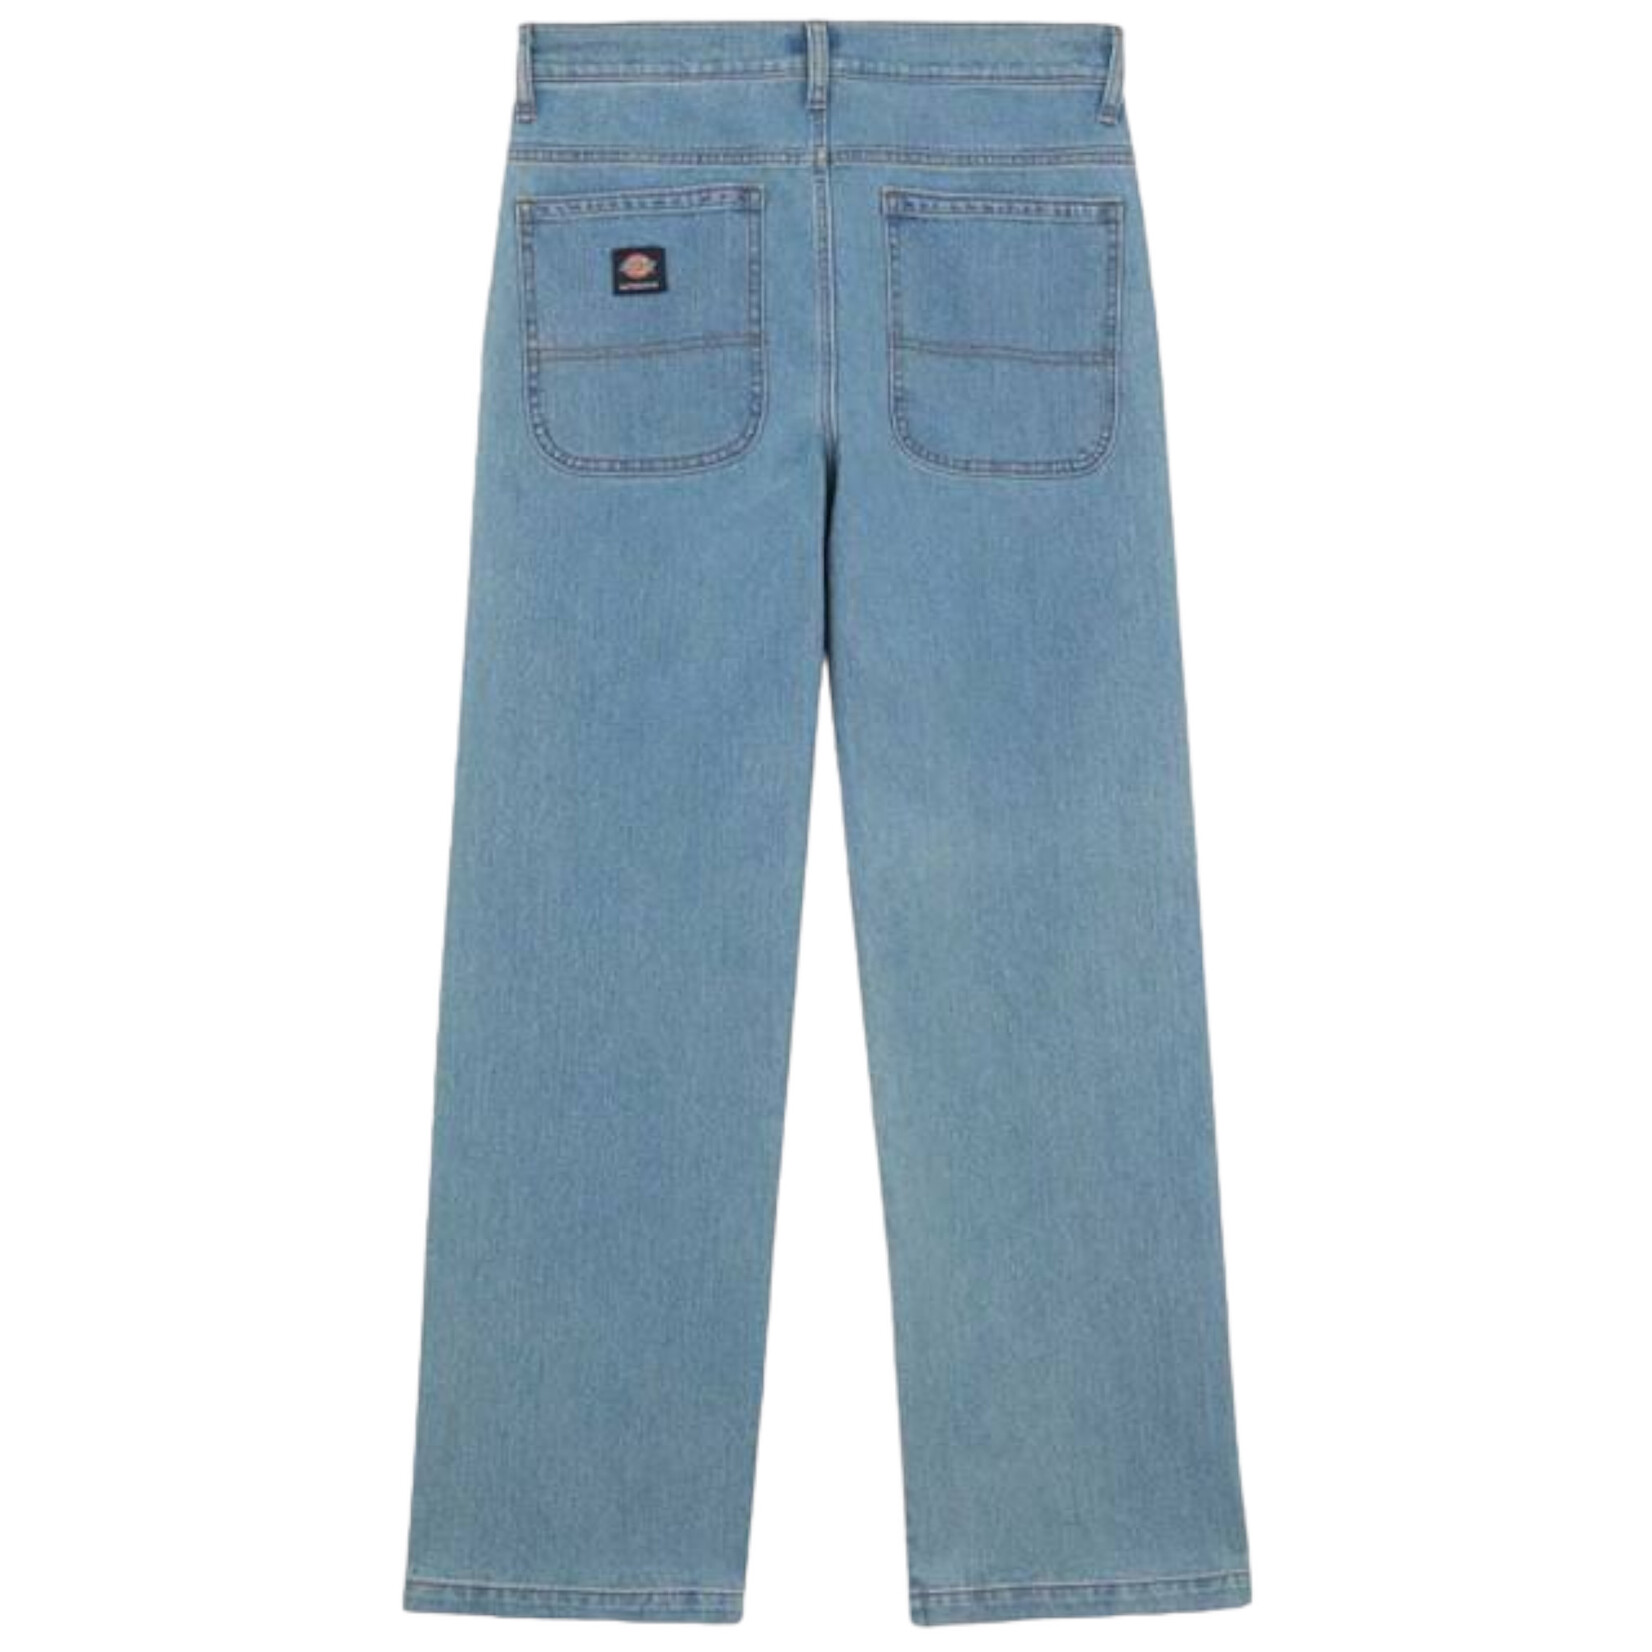 LINCOLN FLARE LEG JEANS IN VINTAGE